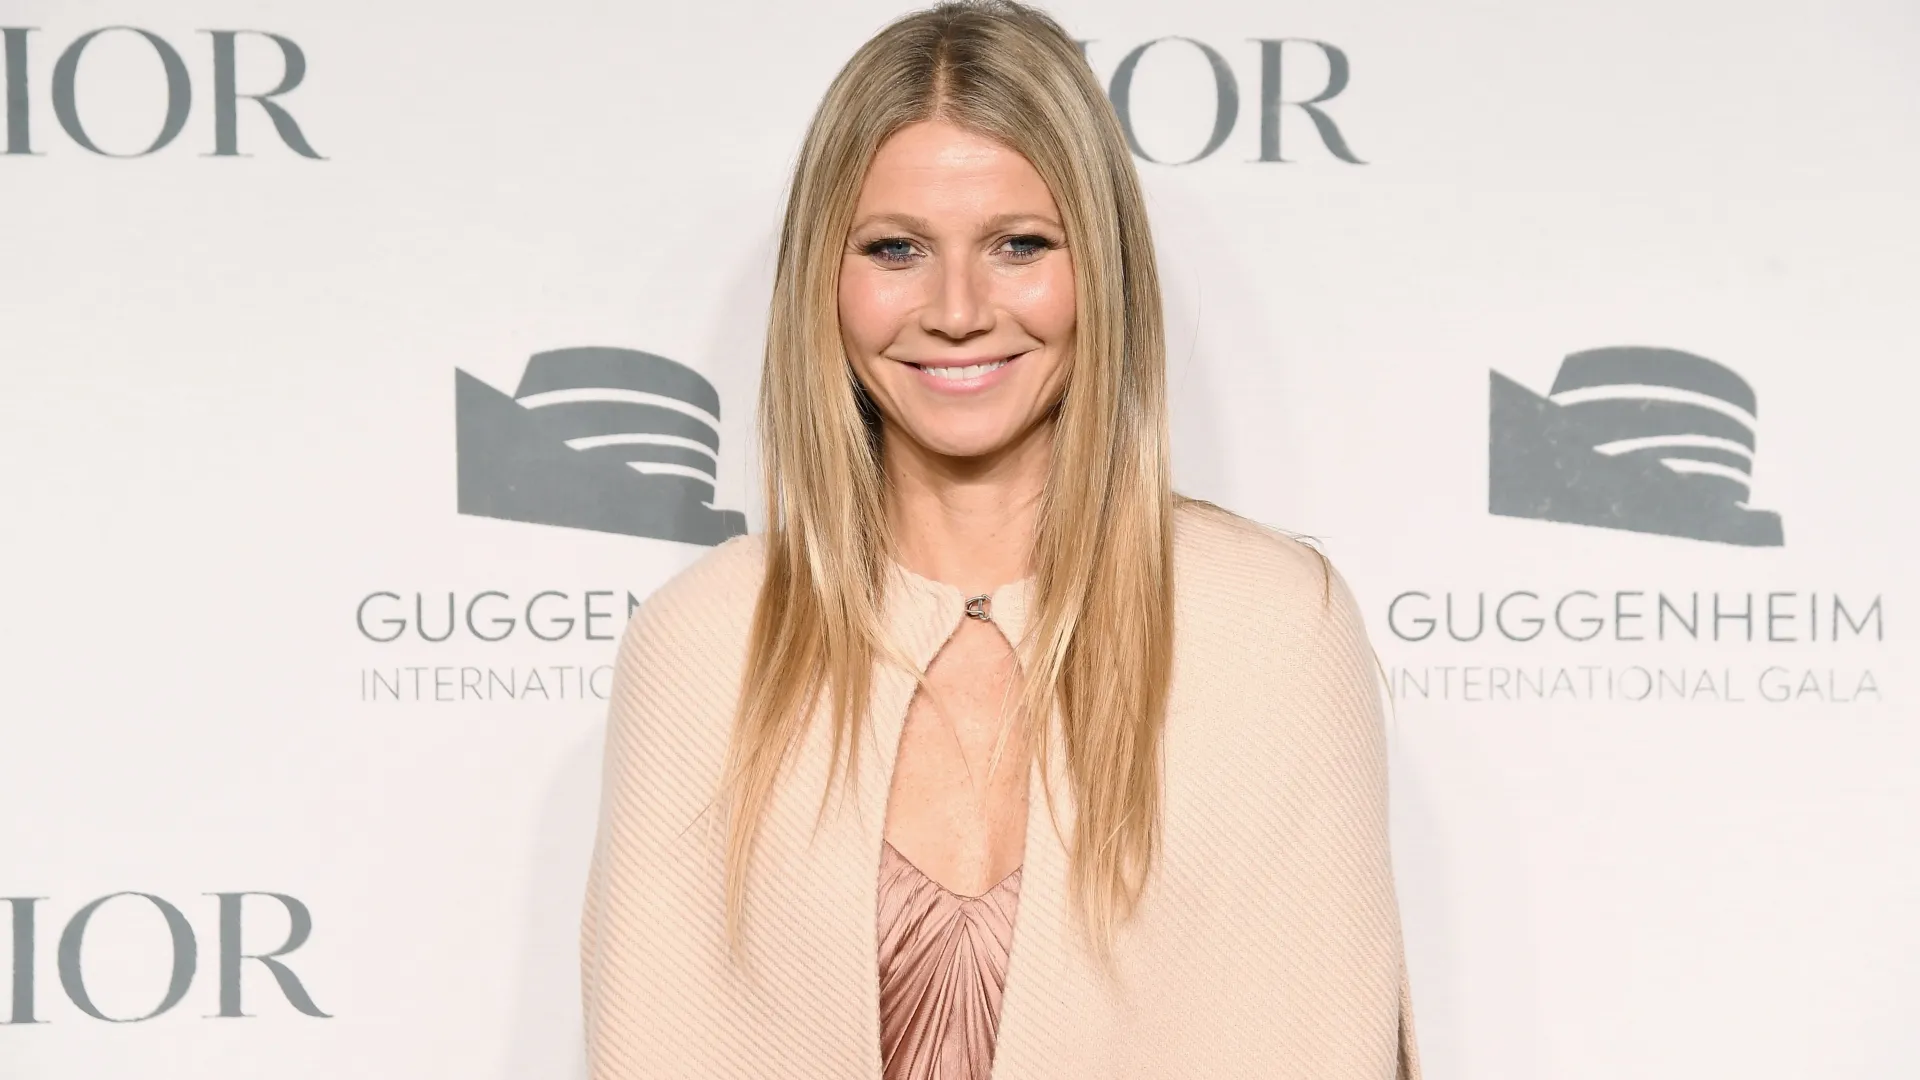 Gwyneth Paltrow Reveals Her Views on Commitment and Relationships